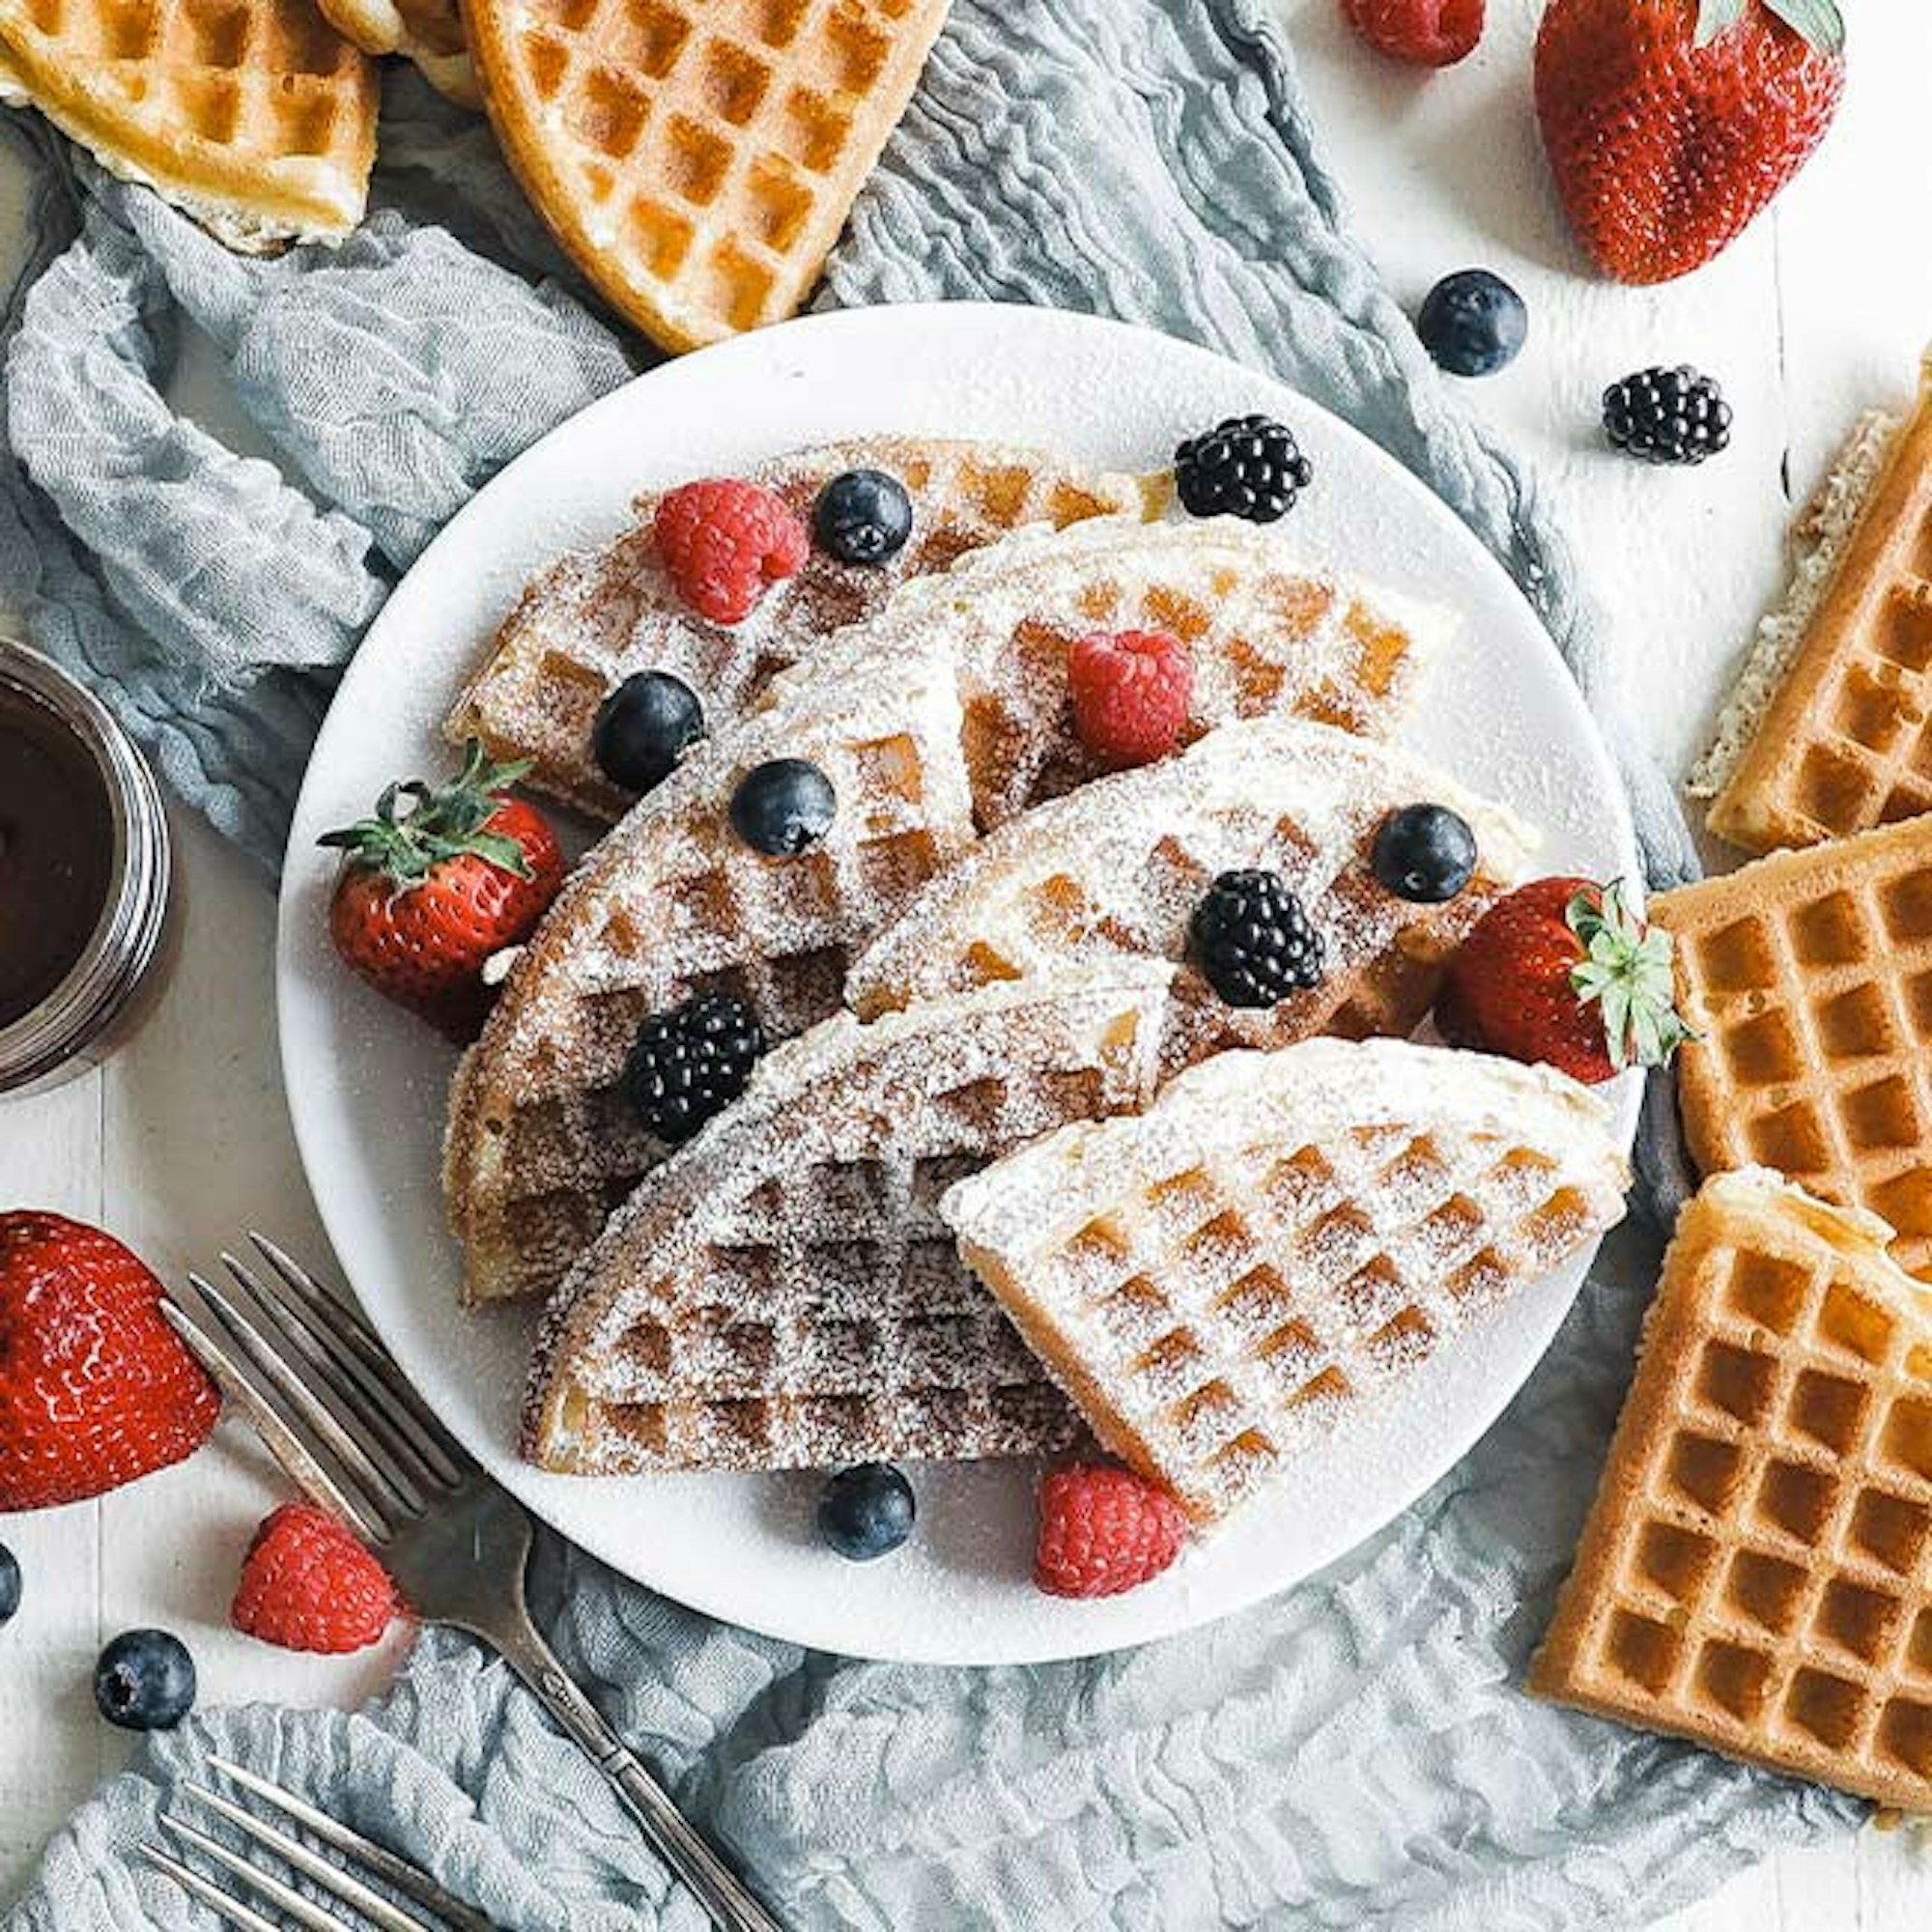 belgium waffles on plate with strawberry and blueberry toppings